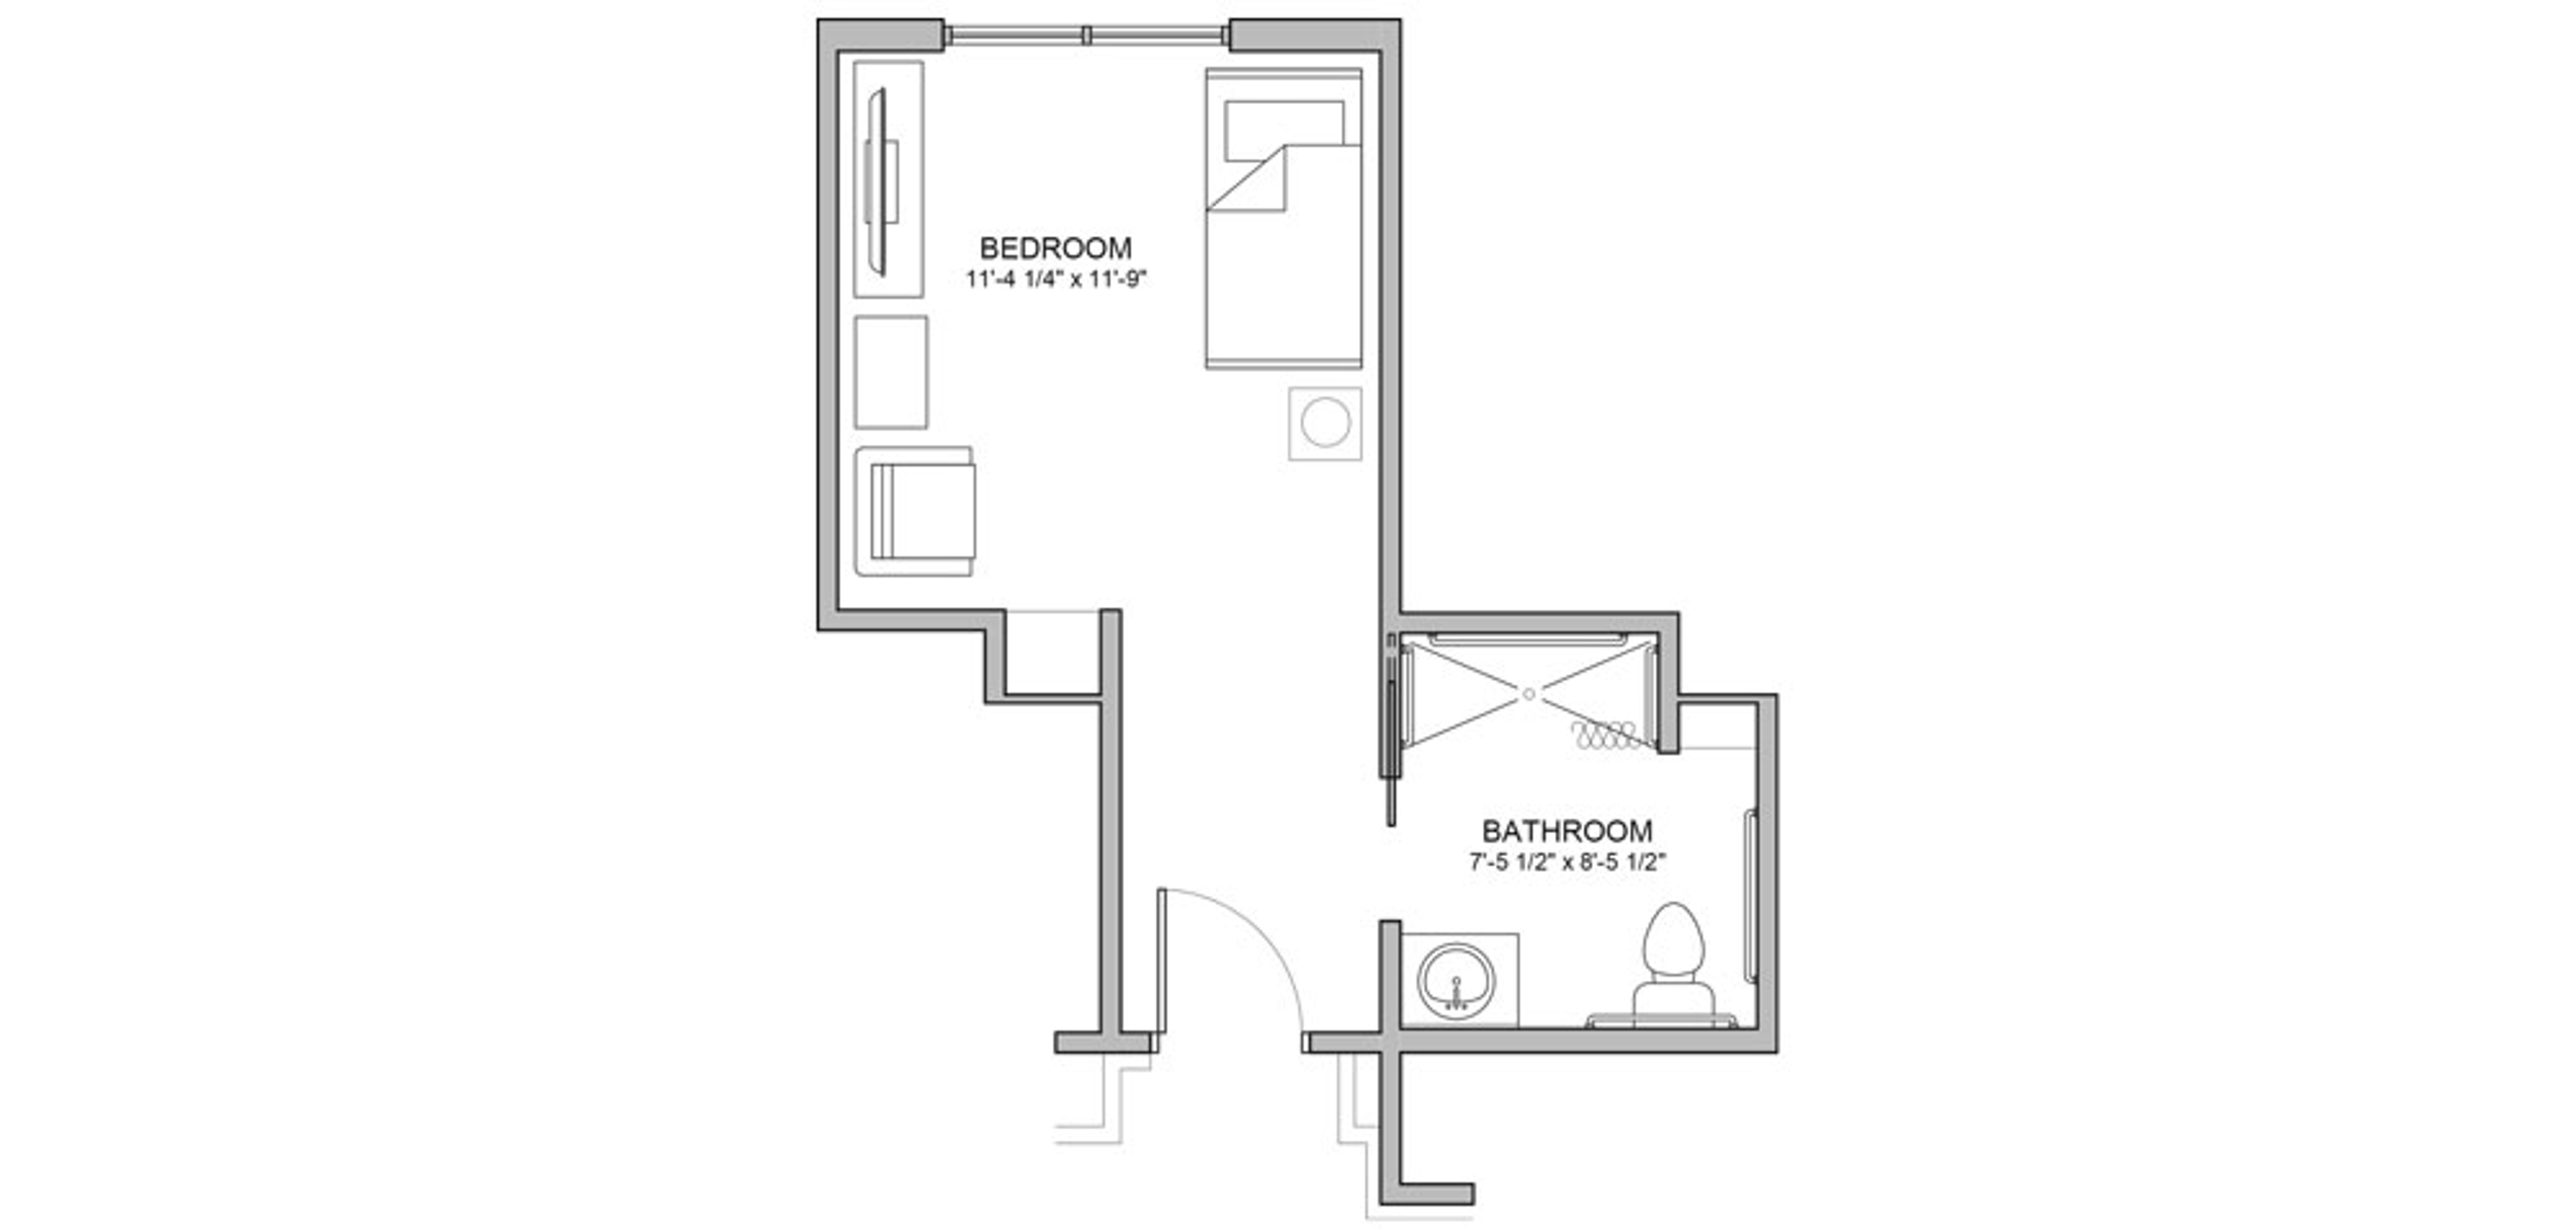 Floorplan - The Auberge at Bee Cave - The Driskell Floor Plan, 1 bed, 1 bath, 296 sq. ft. Memory Care